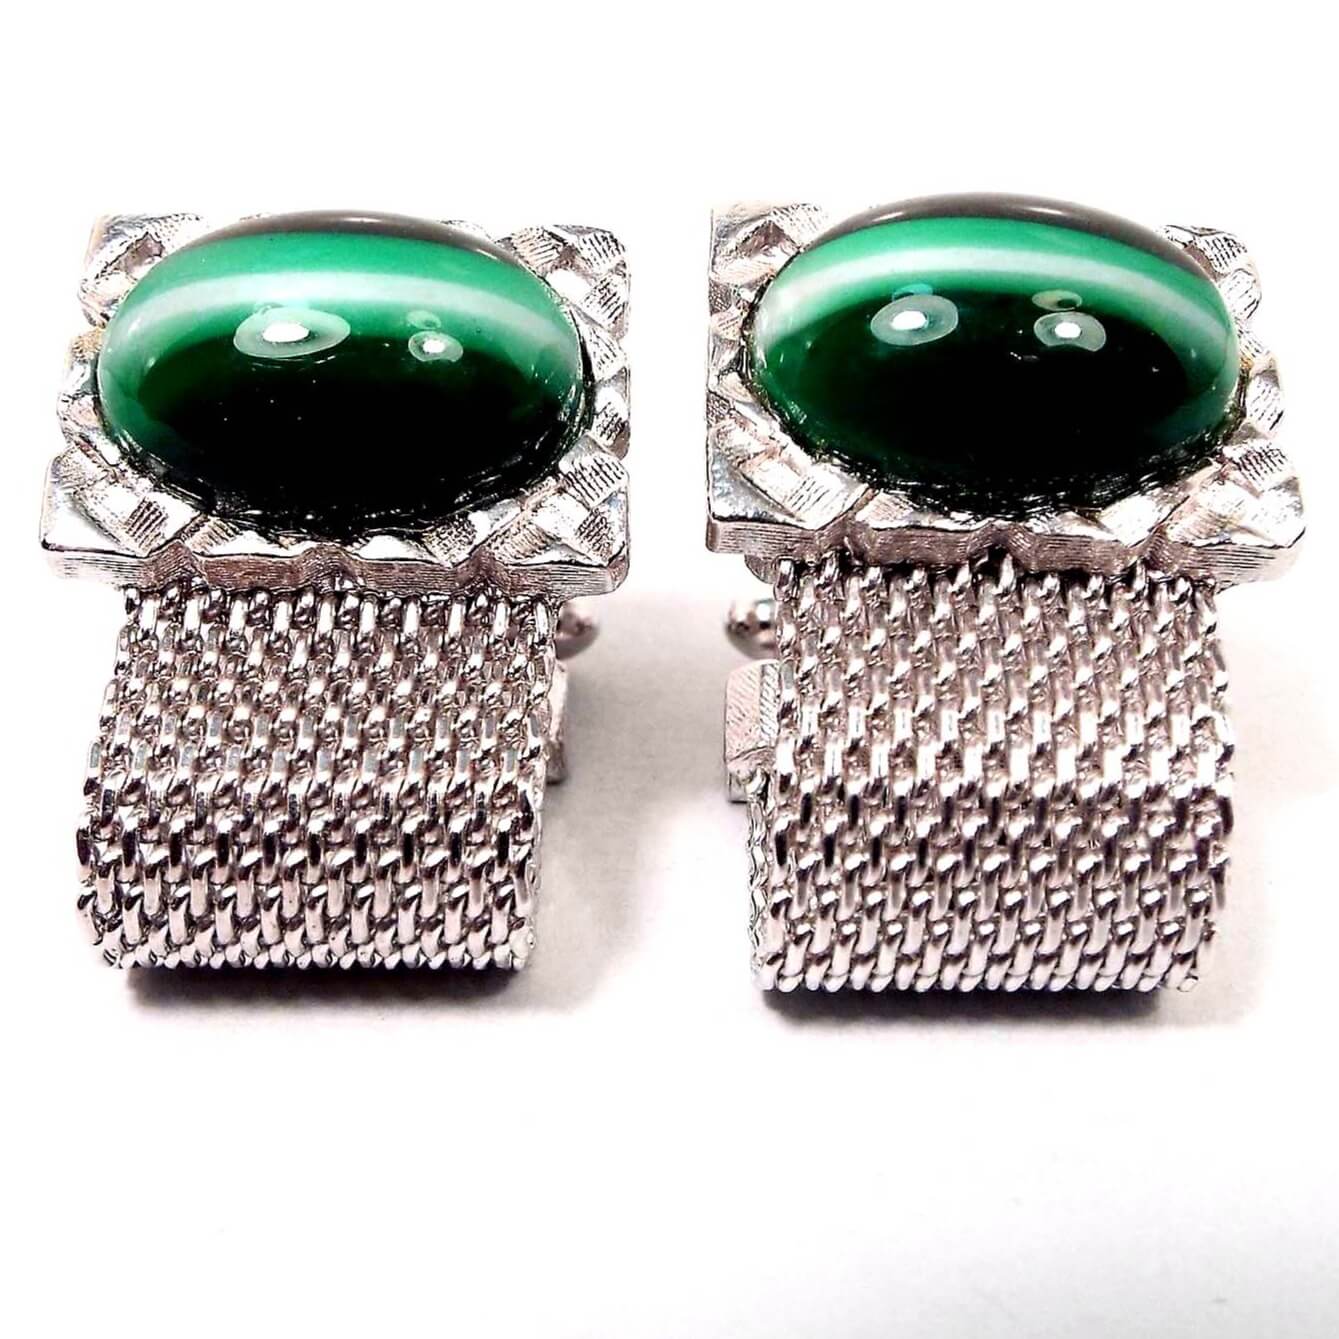 Front view of the 1950's Mid Century vintage Dante wrap around cufflinks. The metal is silver tone in color. There are large oval glass cabs at the top that are dark green with a stripe of light green and white through the middle. There is silver metal mesh coming down from the bottom and around to the back of the cufflinks.